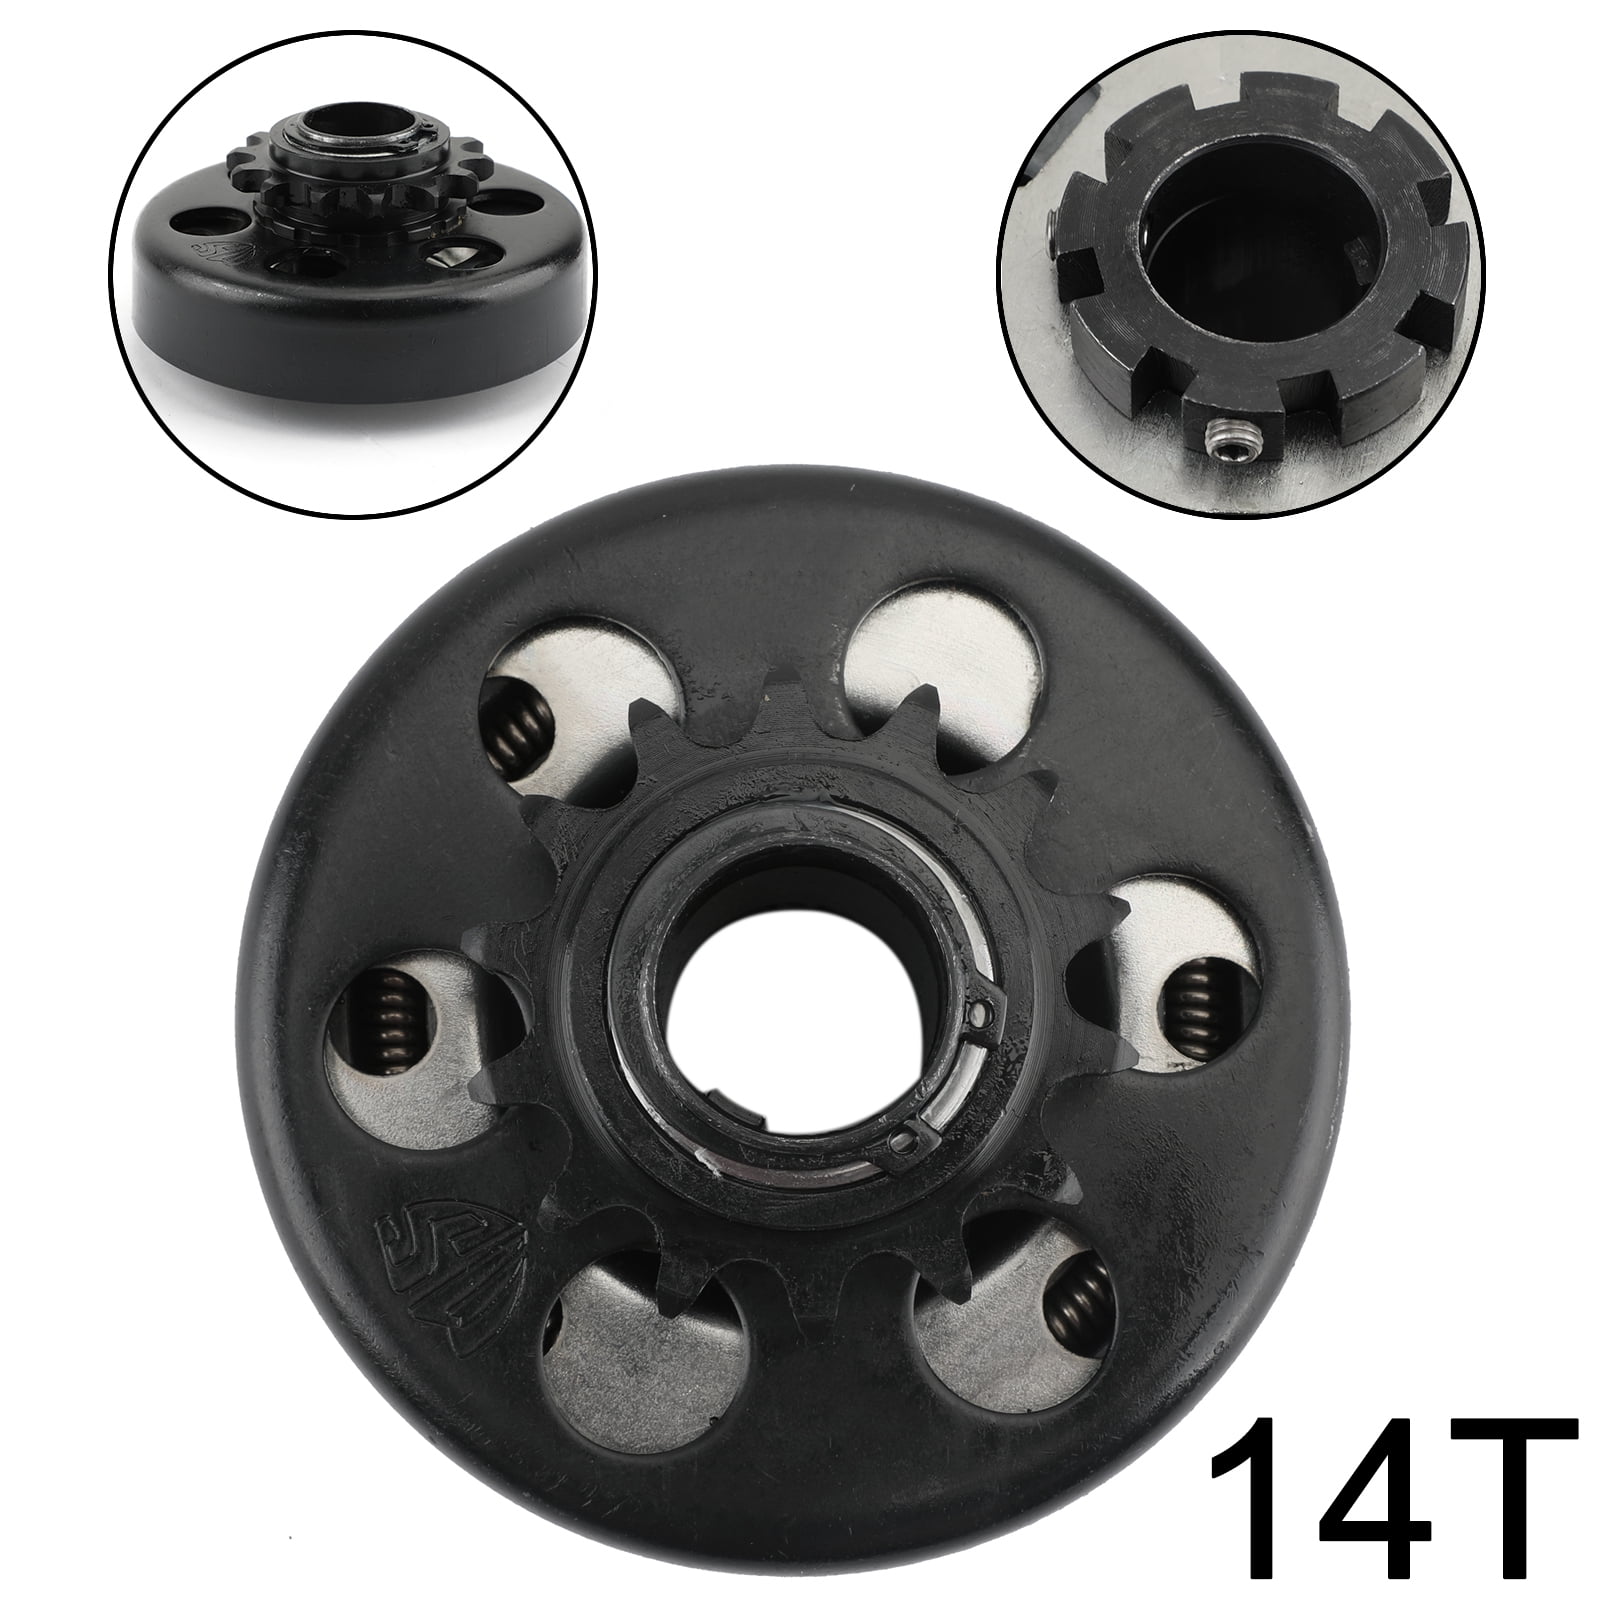 Details about   13HP Go Kart Centrifugal Clutch 1inch Bore 14T 14 Tooth For 40 41 420 Chain 